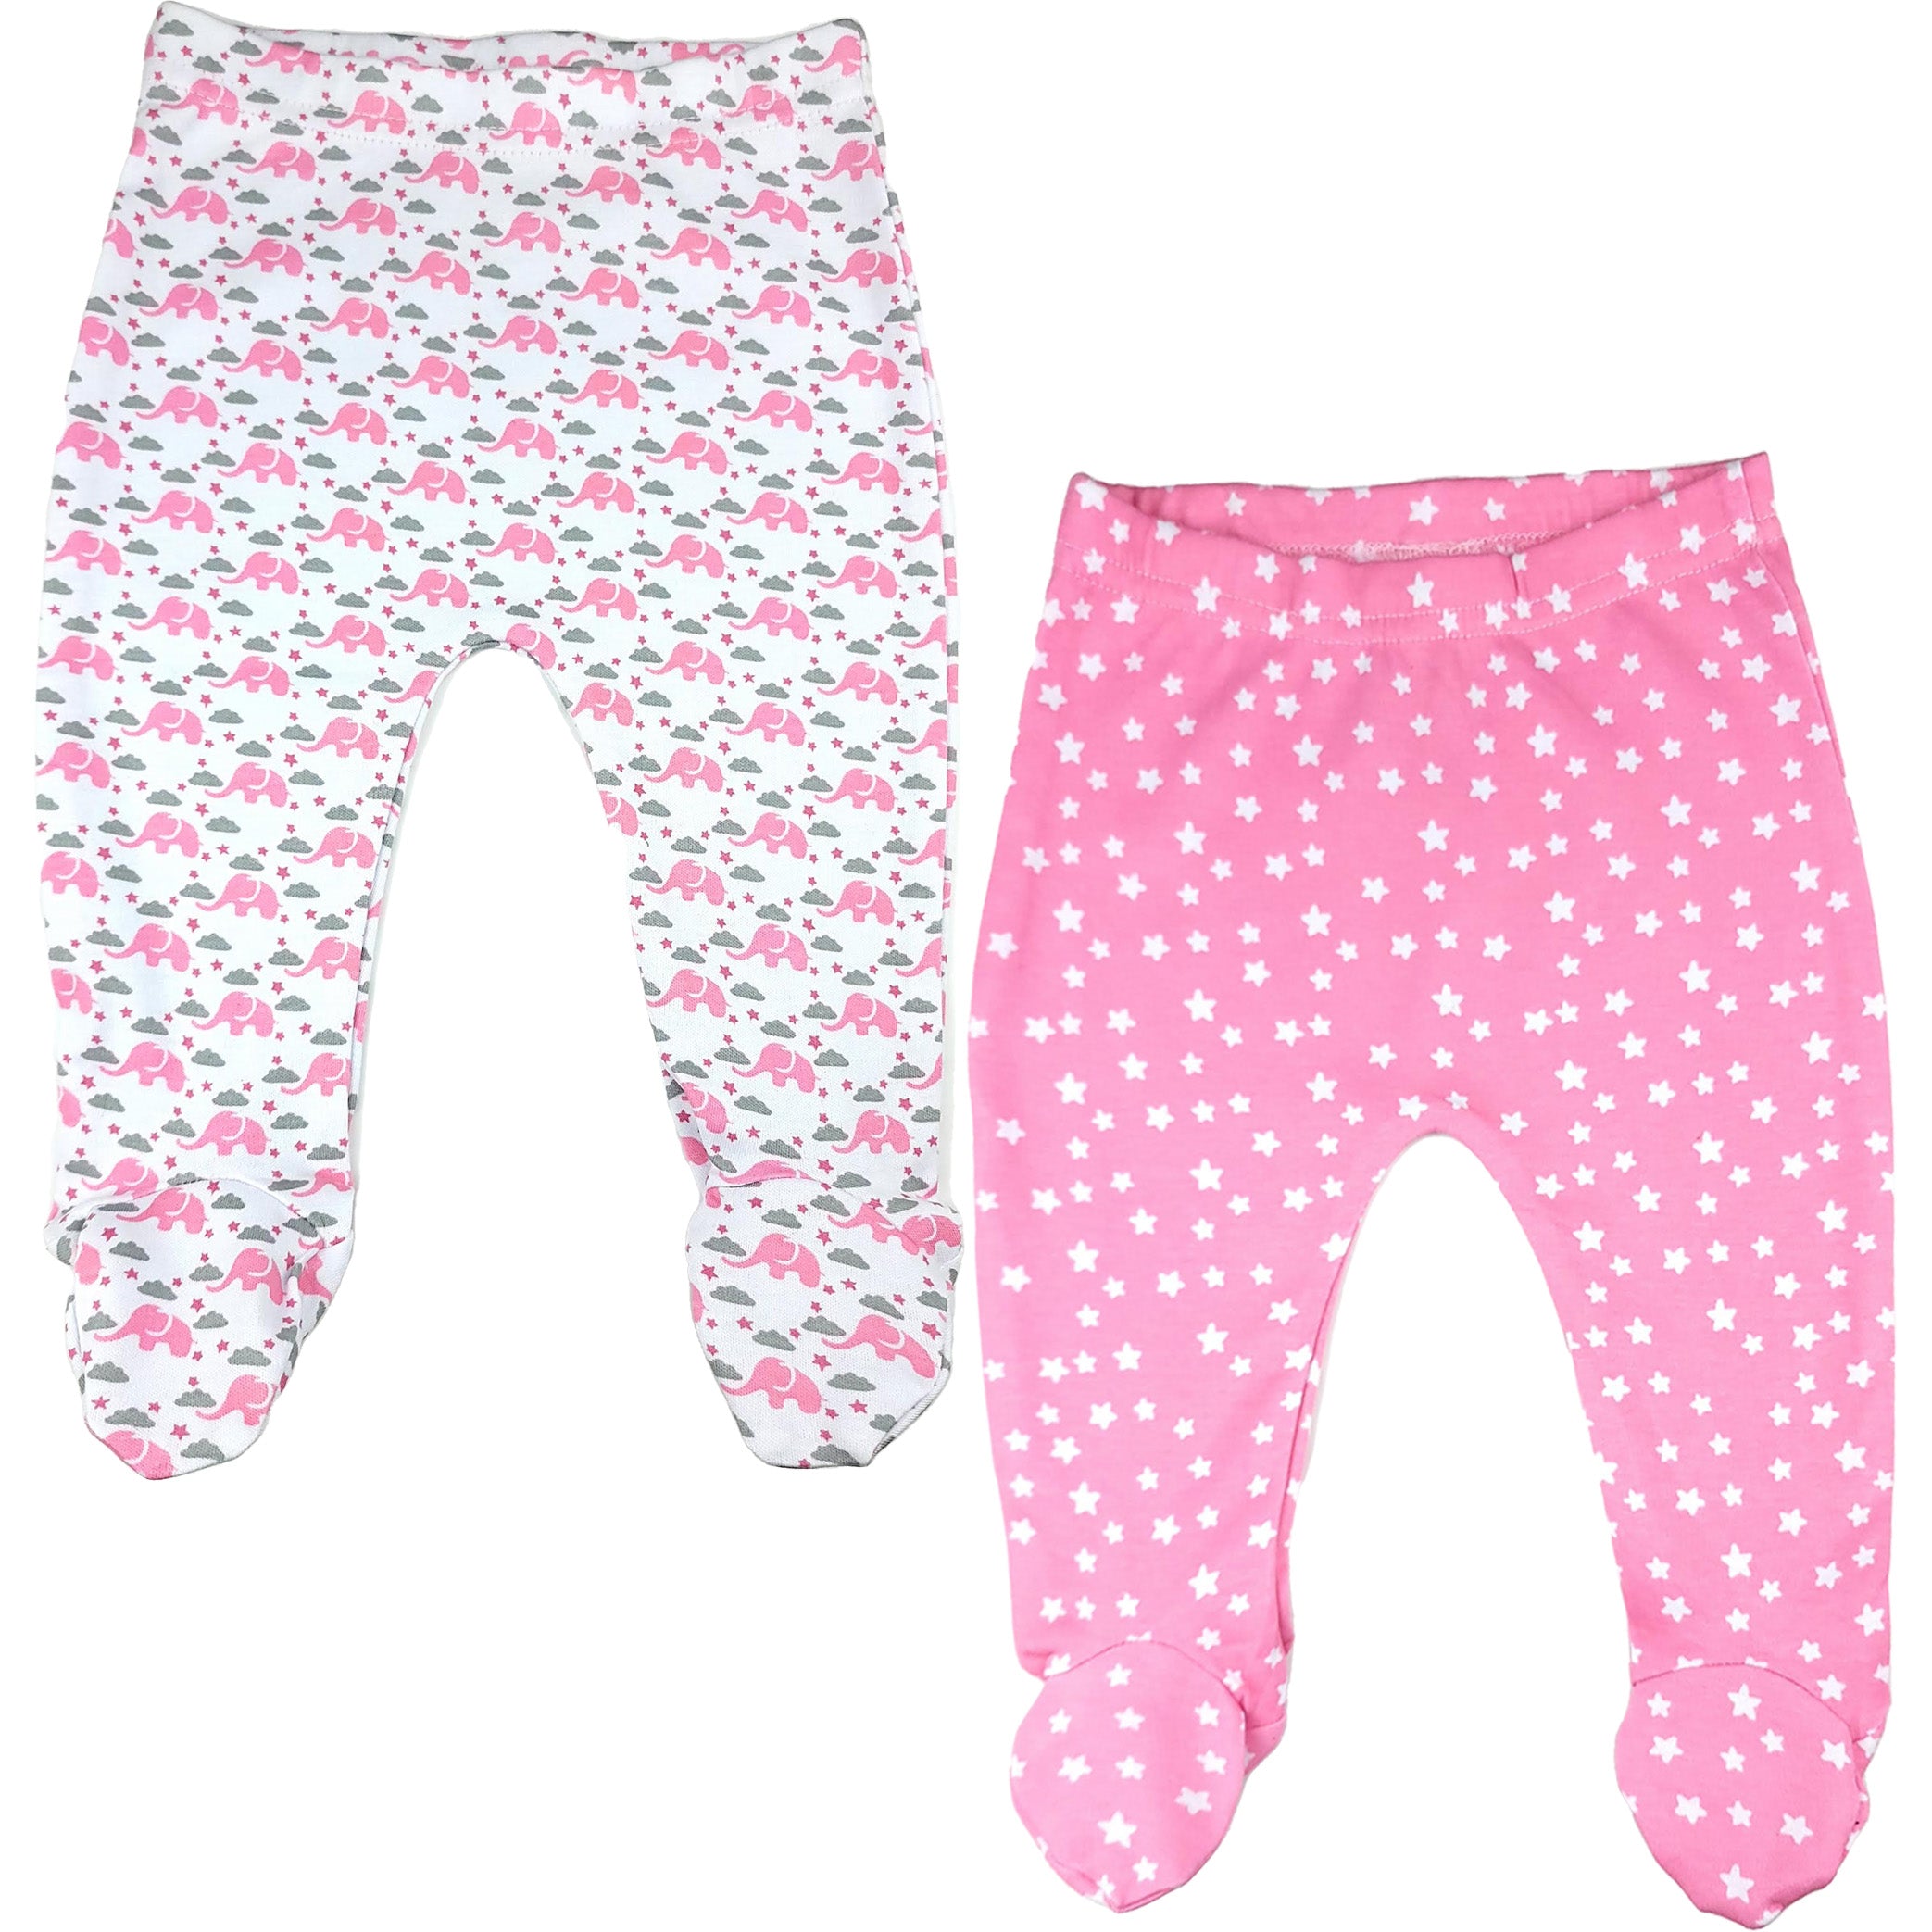 123 Bear 100% Cotton Baby Pants with Footies 100% Cotton Unisex Boys Girls - 2 Pack